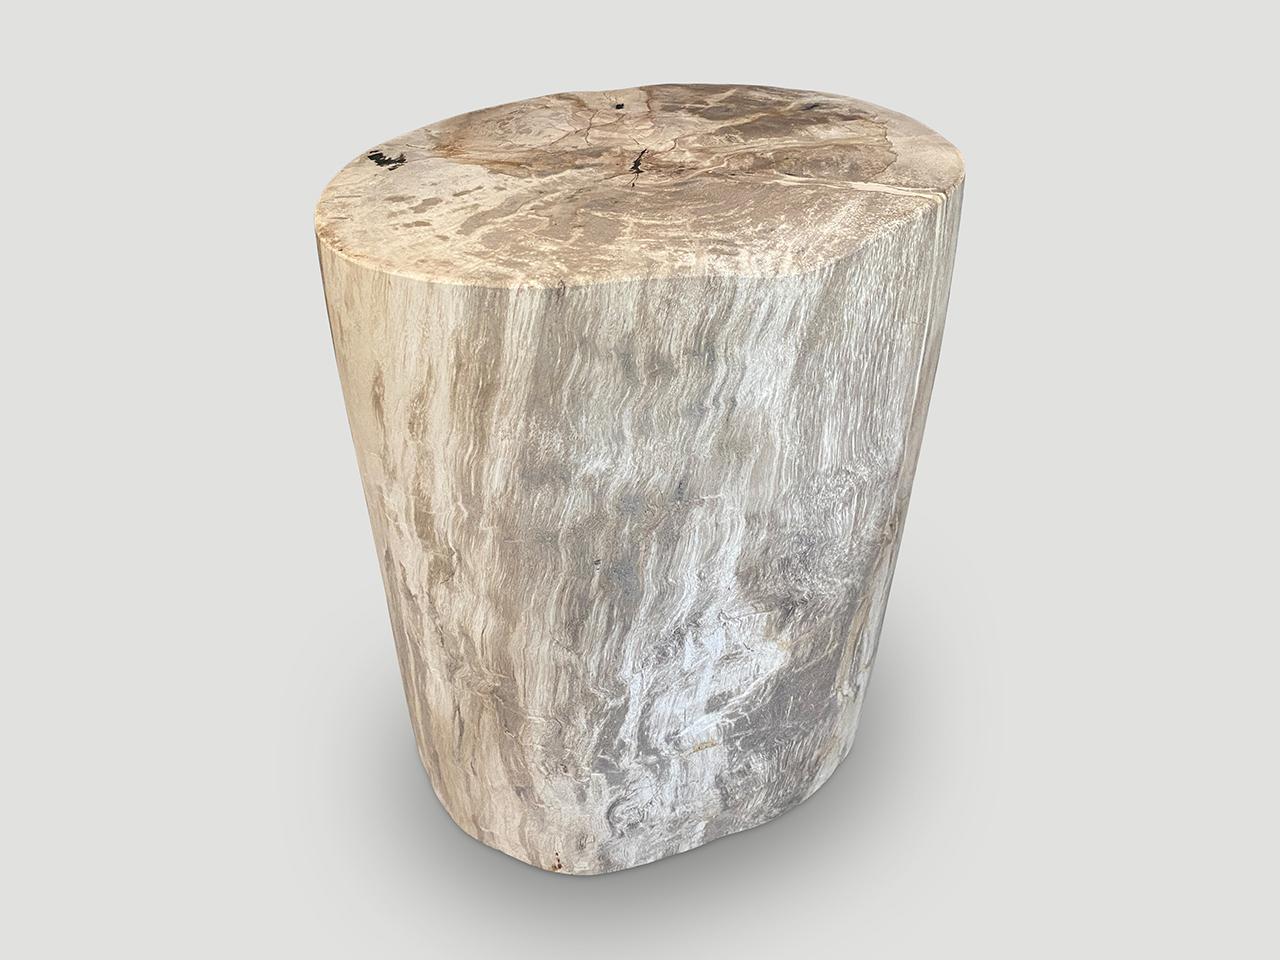 High quality petrified wood side table in beautiful grey and beige tones. It’s fascinating how Mother Nature produces these exquisite 40 million year old petrified teak logs with such contrasting colors and natural patterns throughout. Modern yet